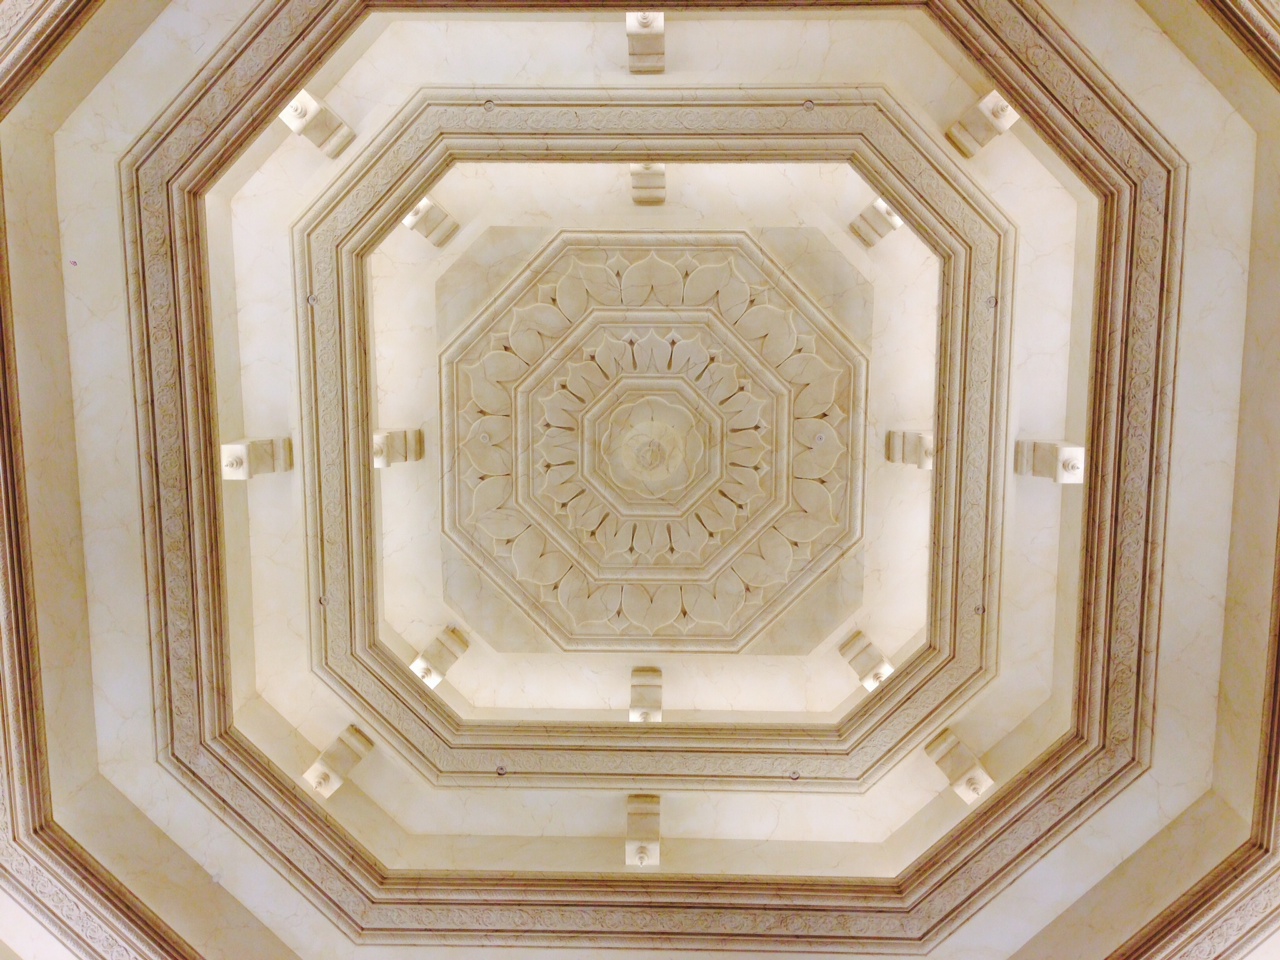 8 - The octagonal dome in the temple room features LED lights